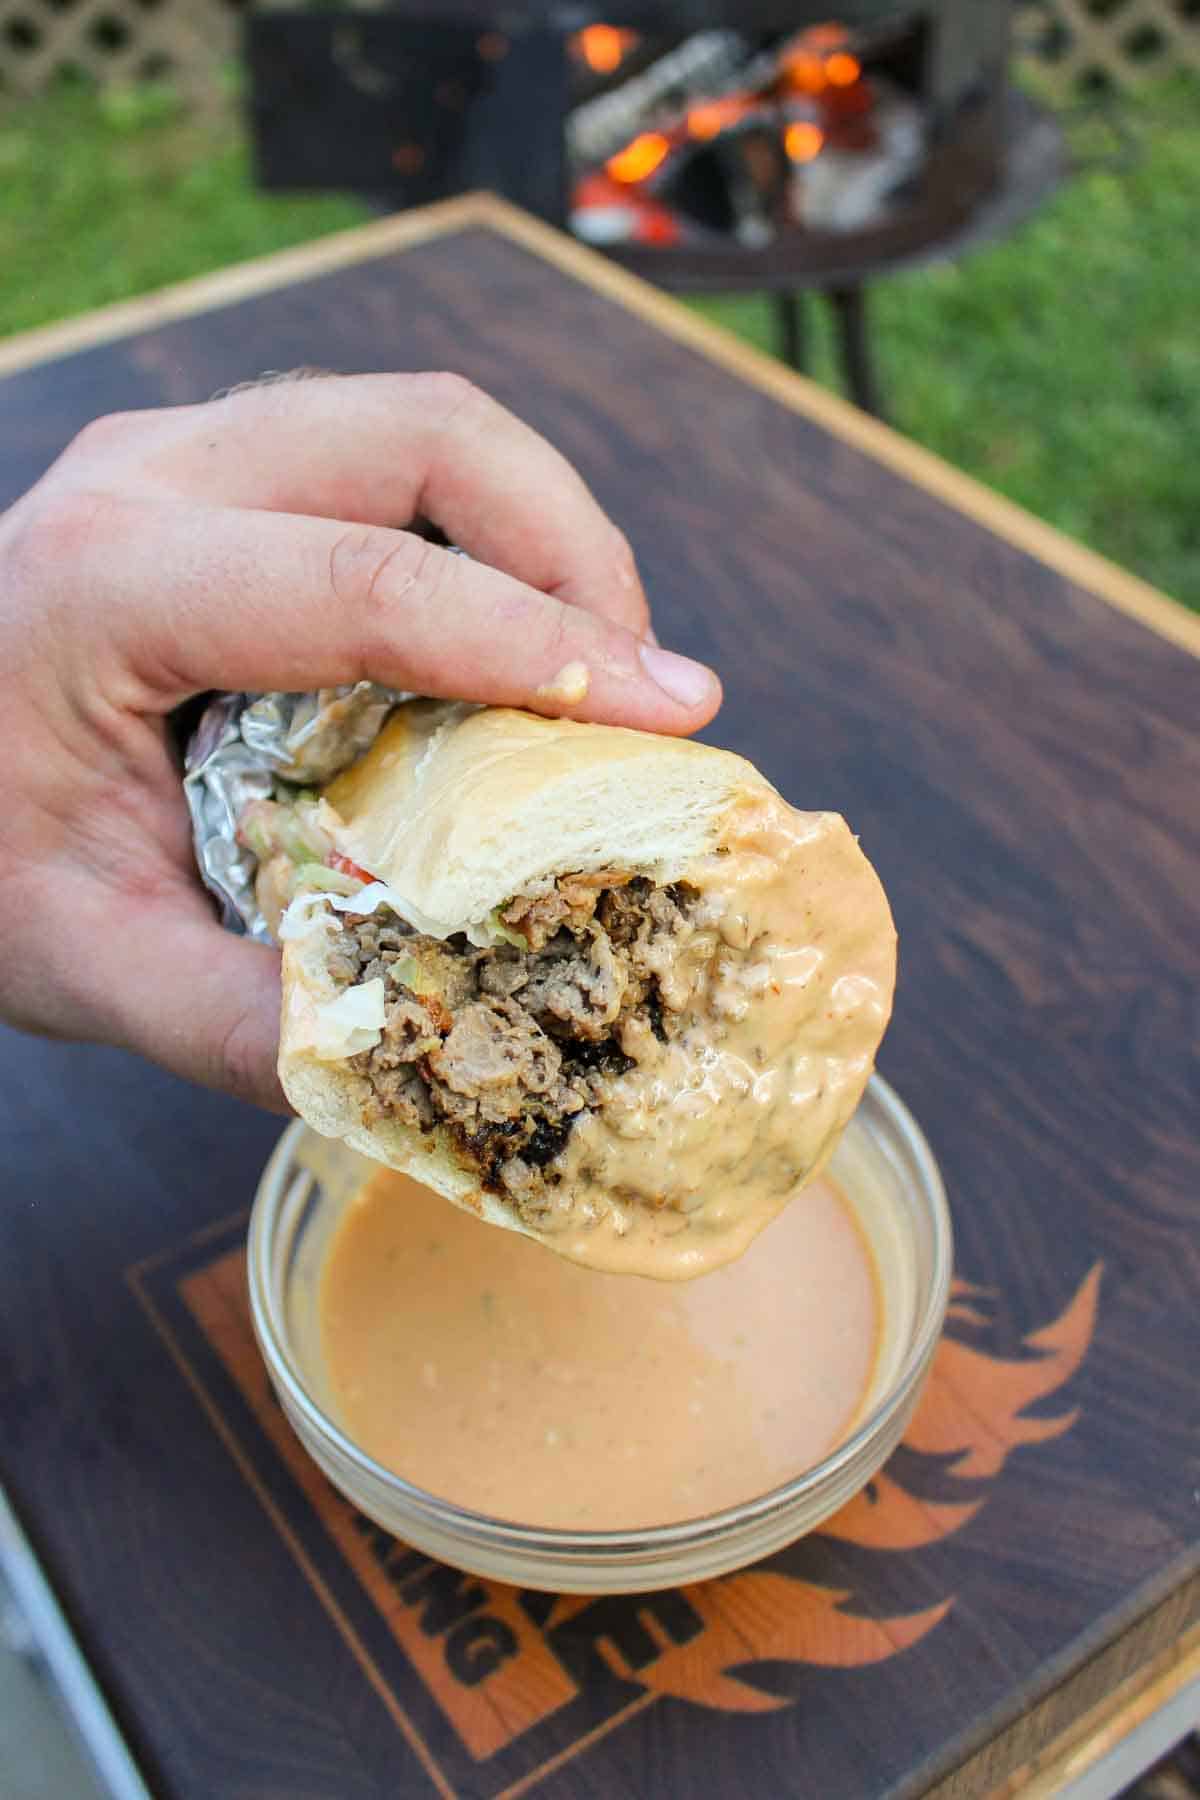 The cheesesteak after being dipped in the sauce.